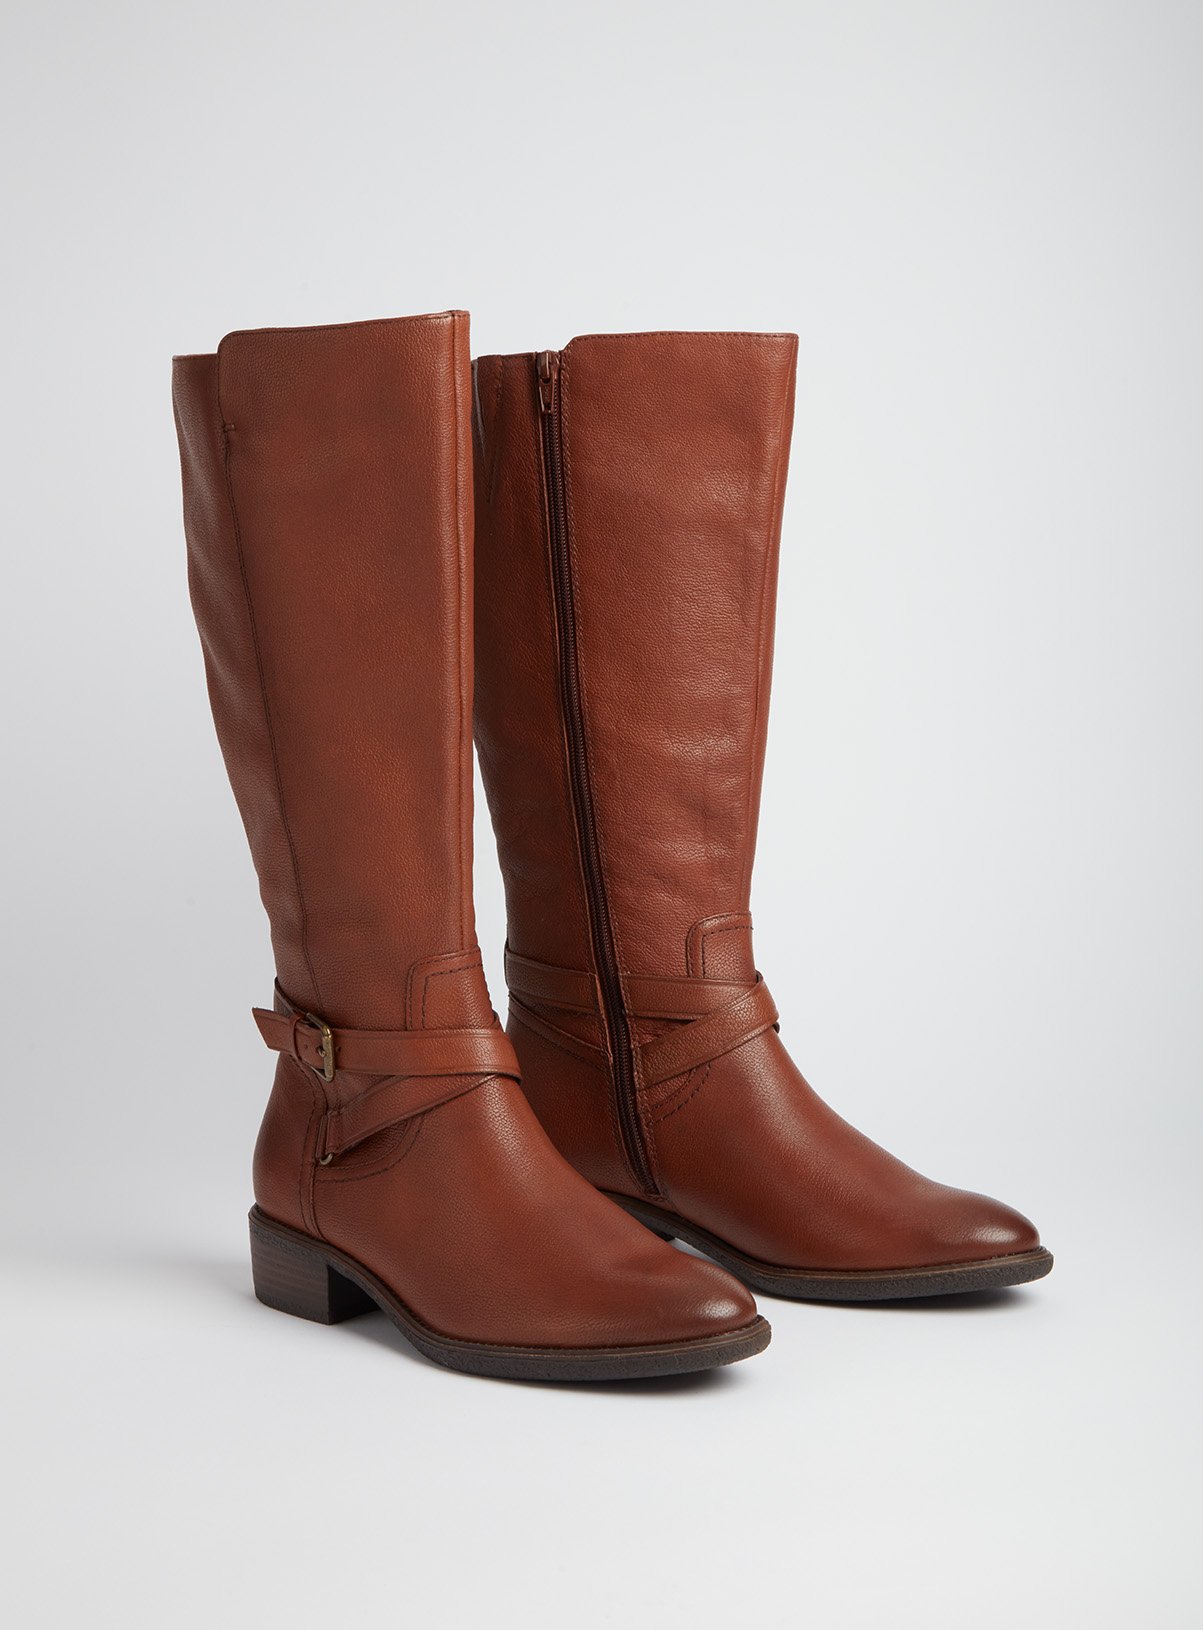 wide calf tan leather boots